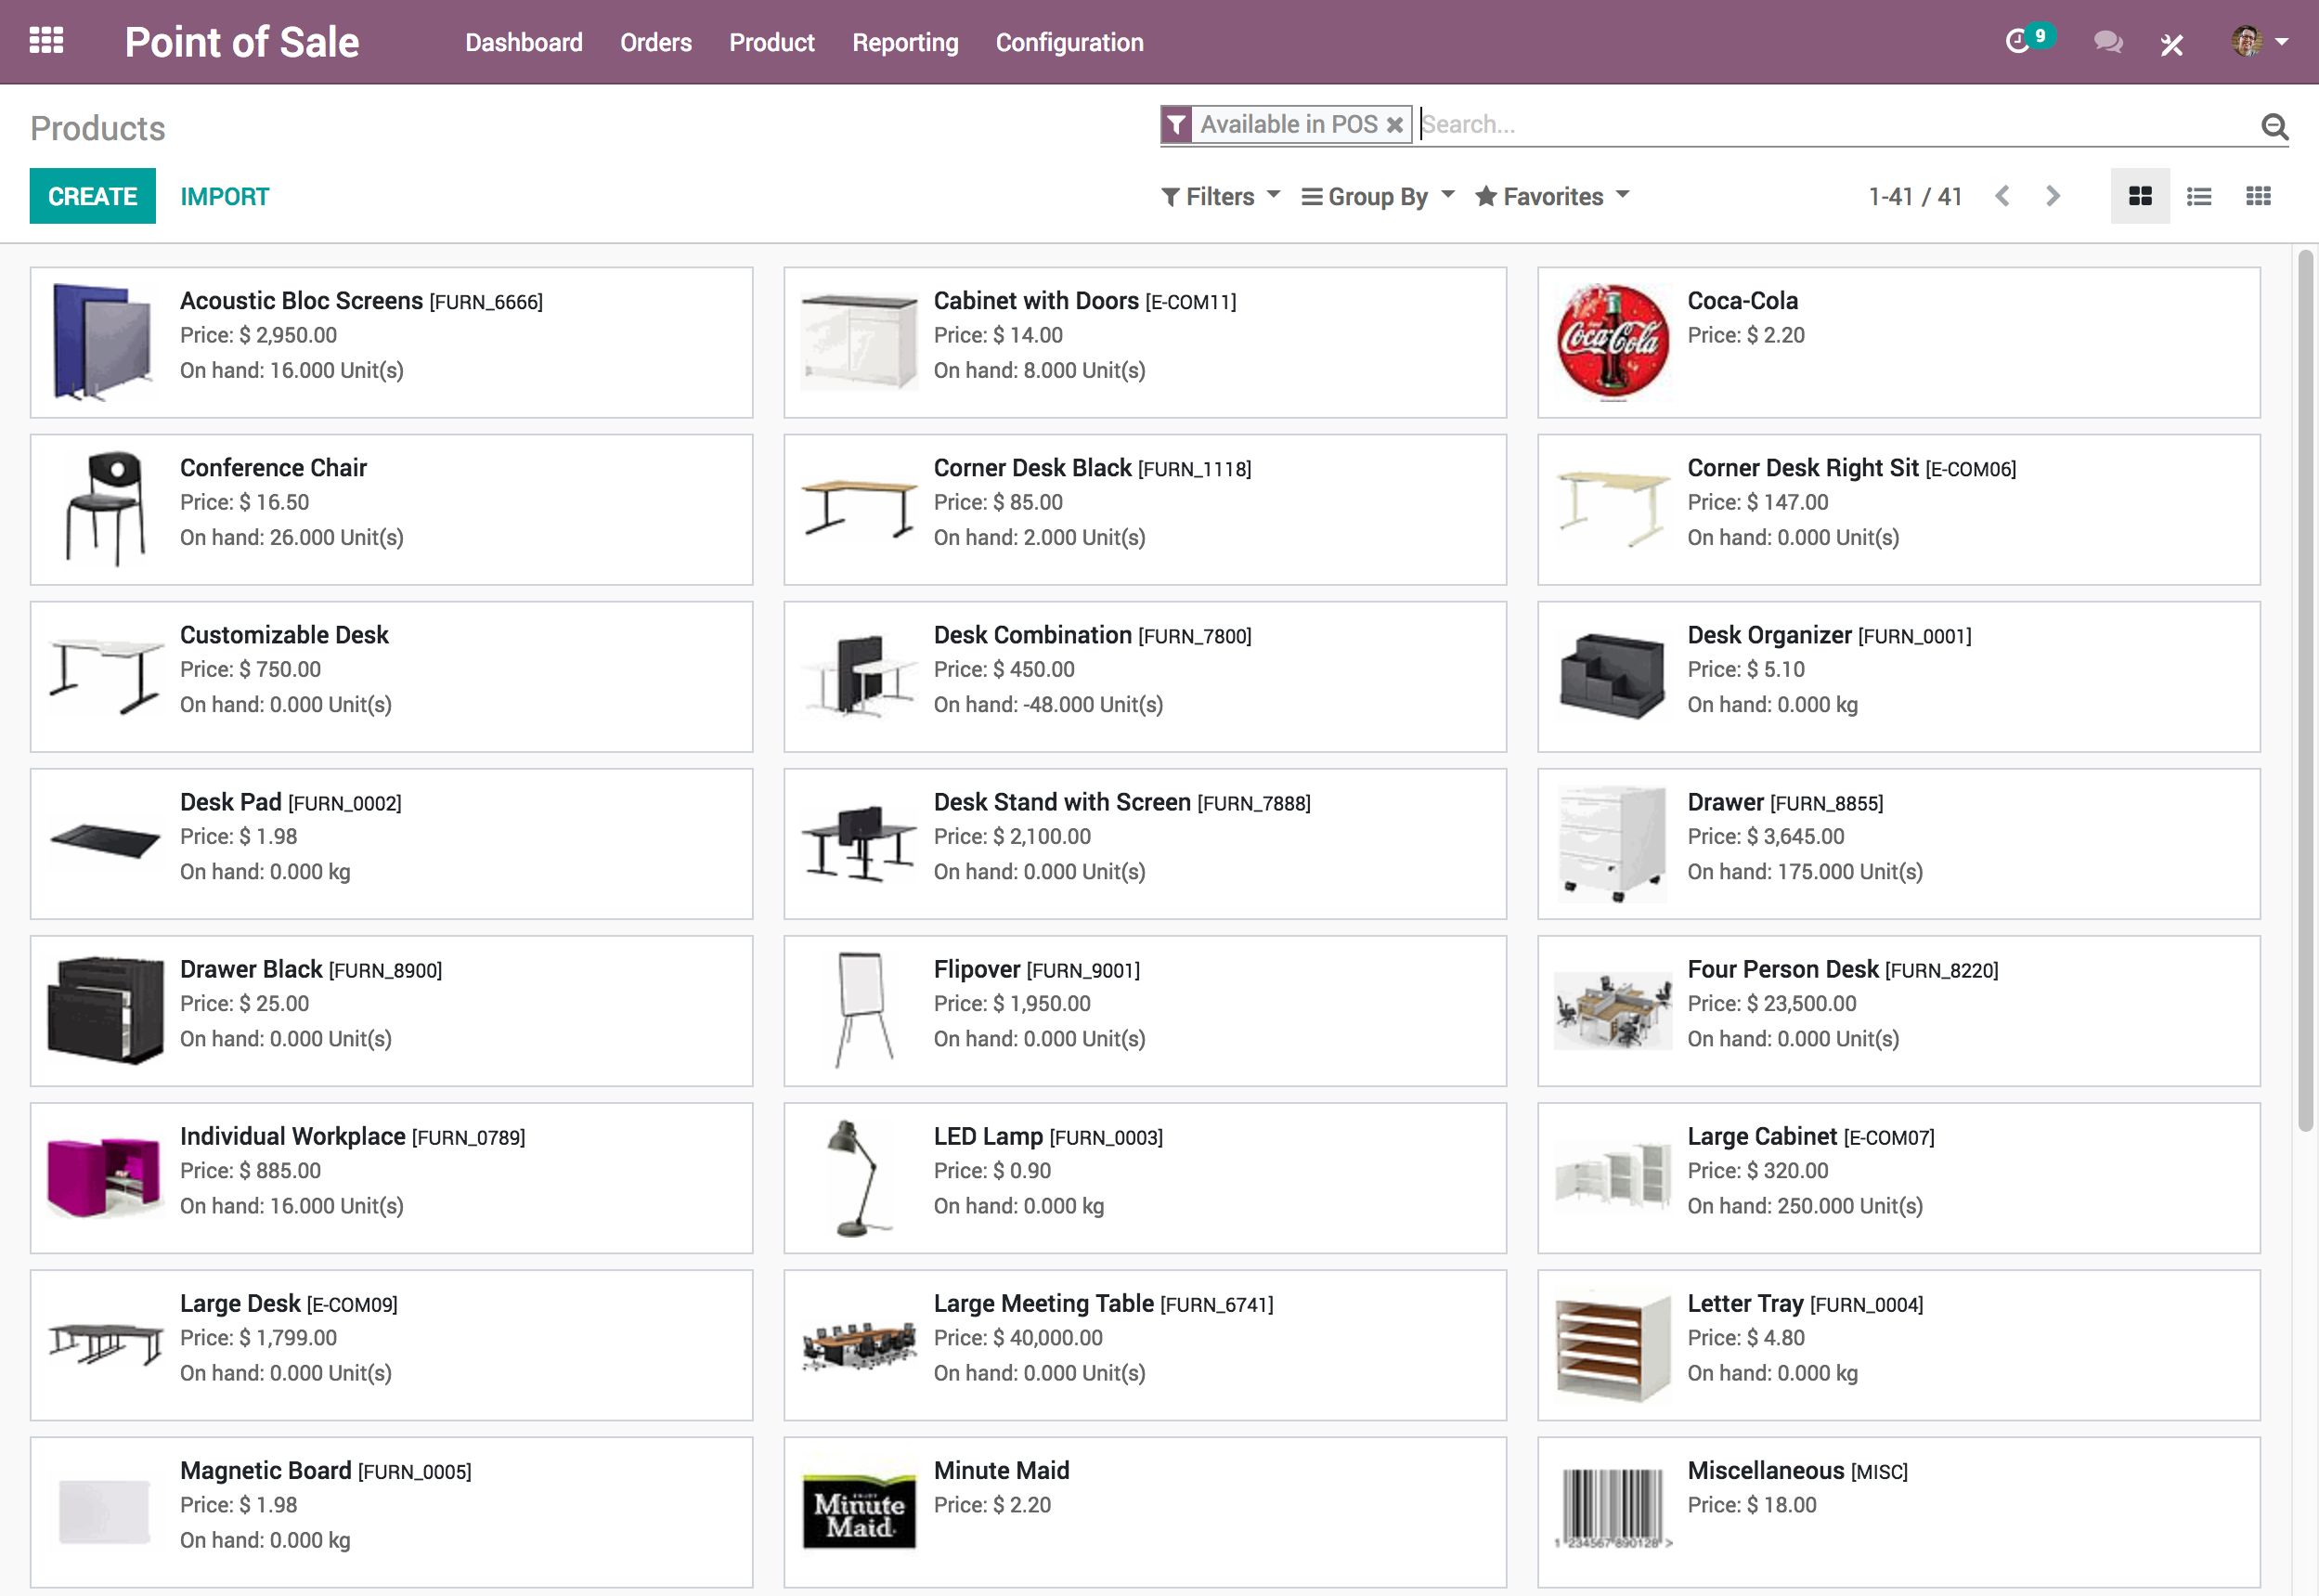 Odoo Software - Odoo Point of Sale (POS) products screenshot